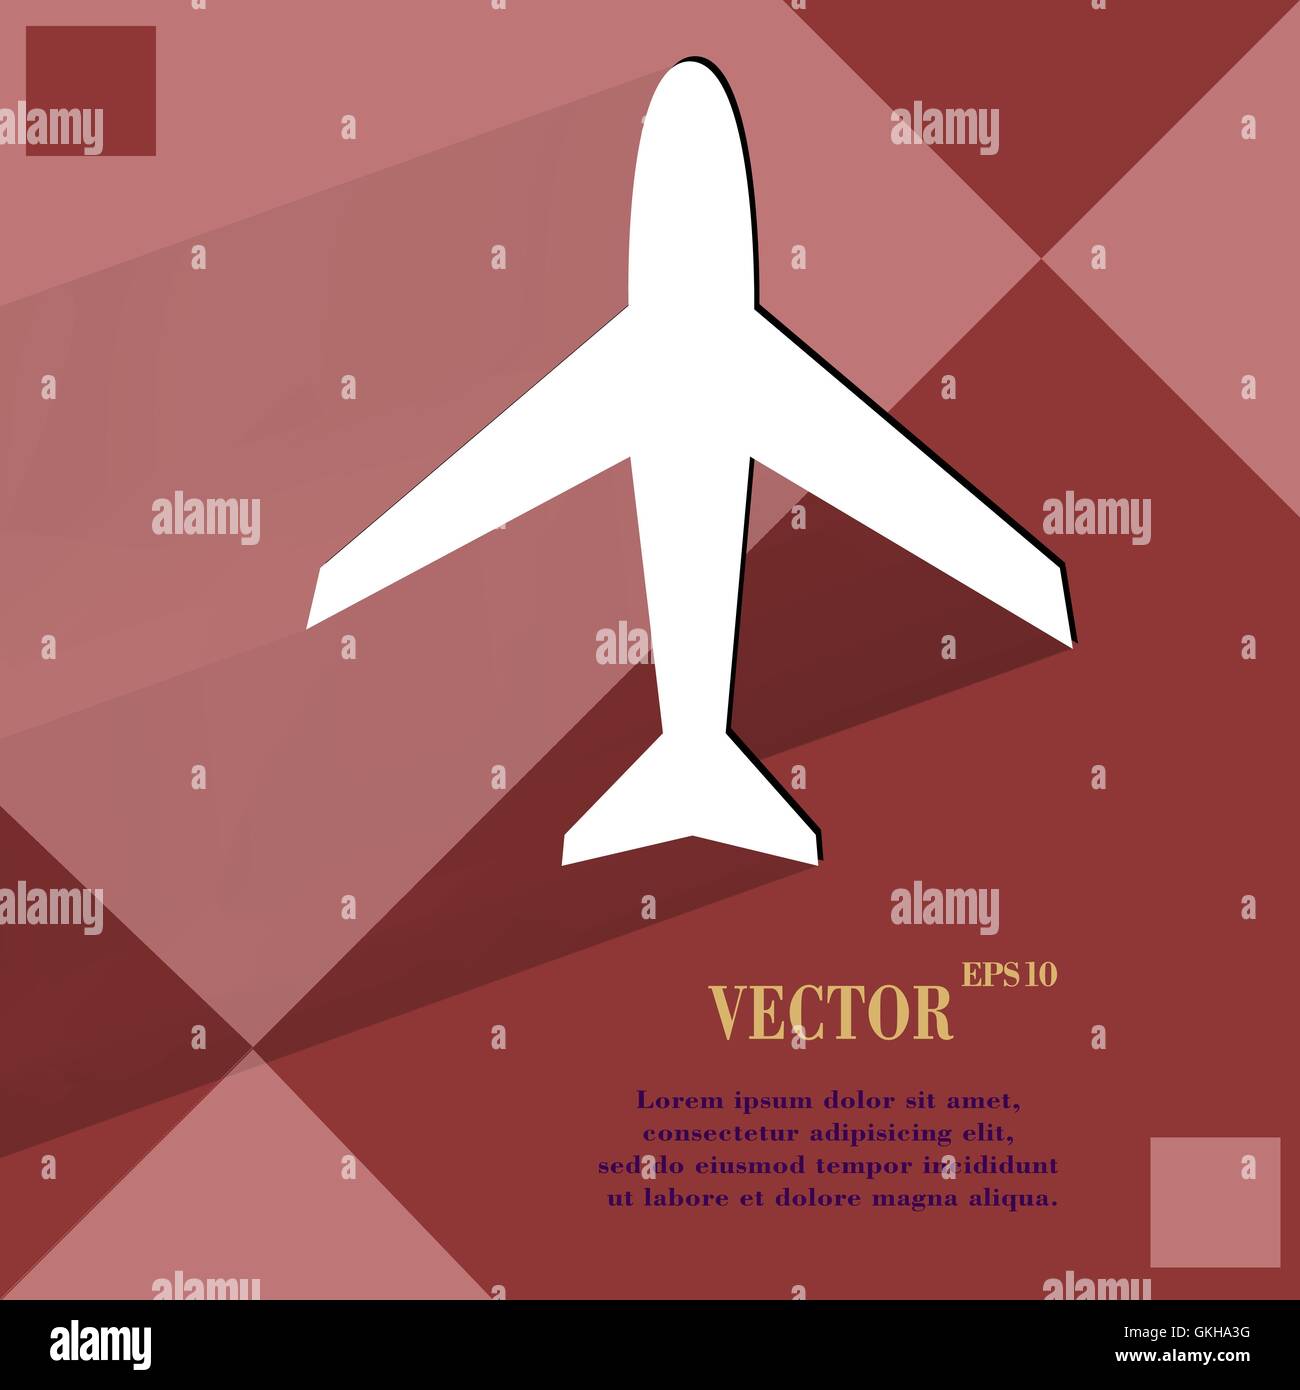 Plane . Flat modern web design on a flat geometric abstract background Stock Vector